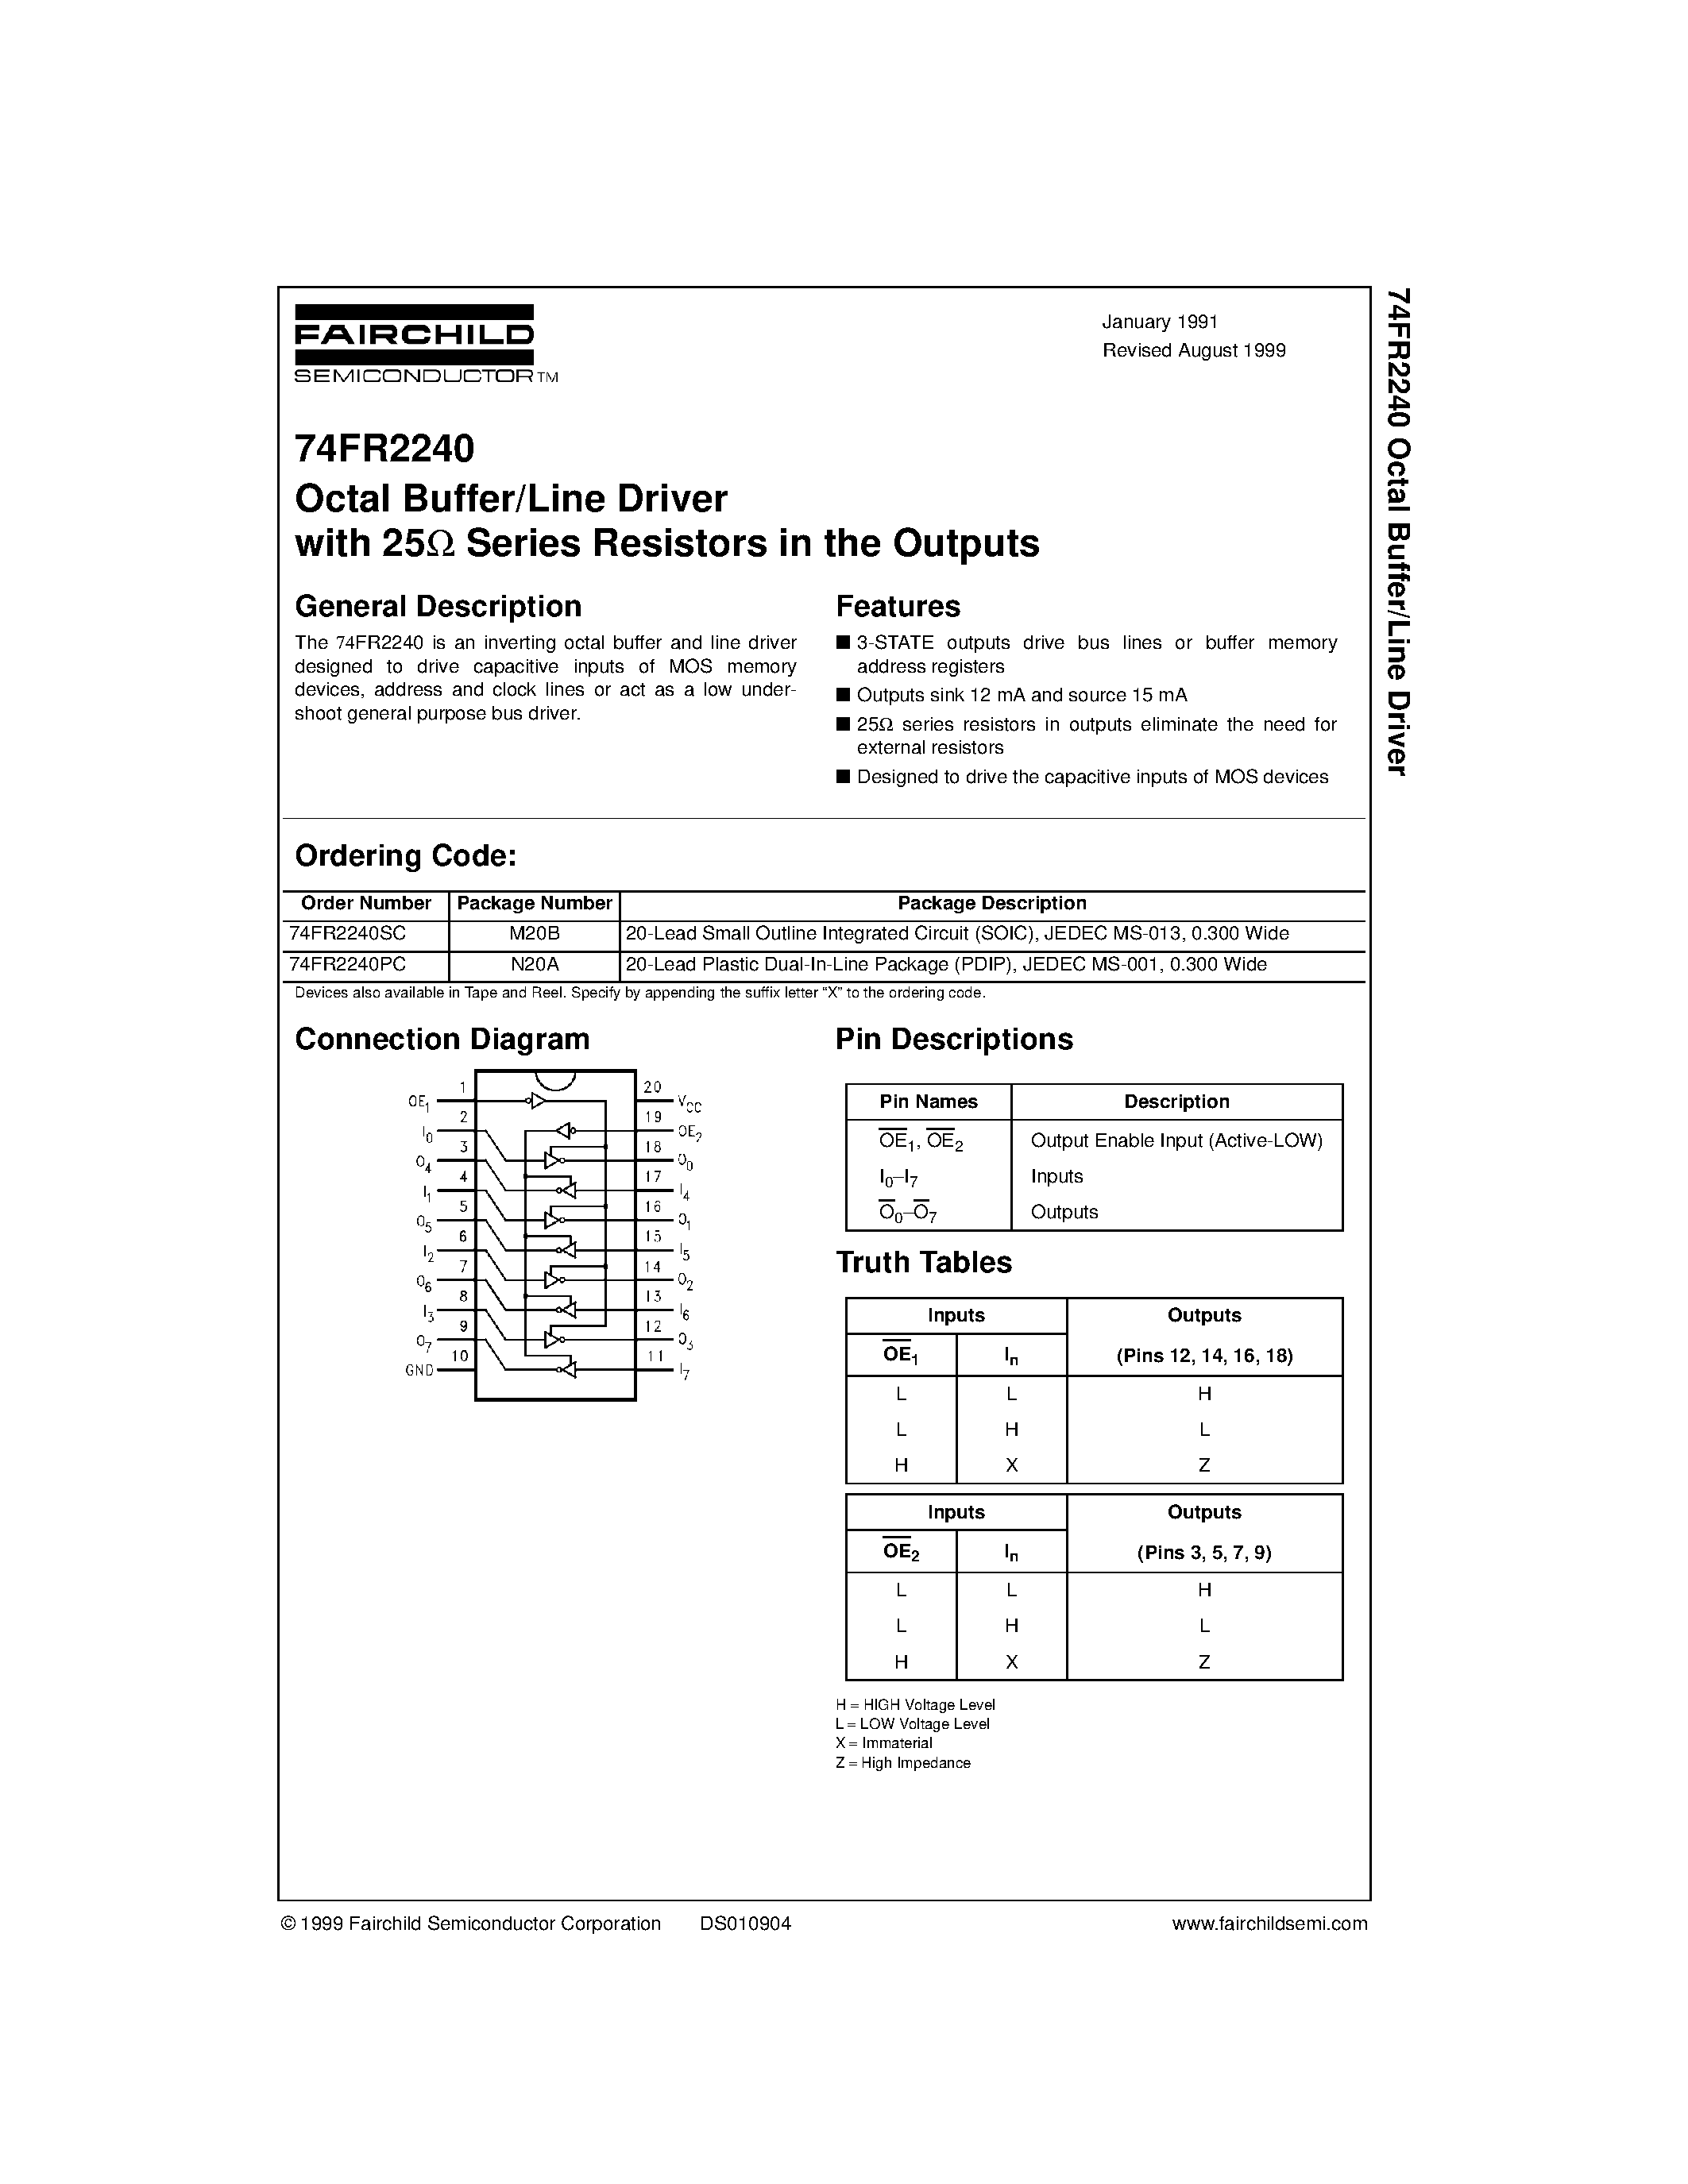 Datasheet 74FR2240SC - Octal Buffer/Line Driver with 25 Series Resistors in the Outputs page 1